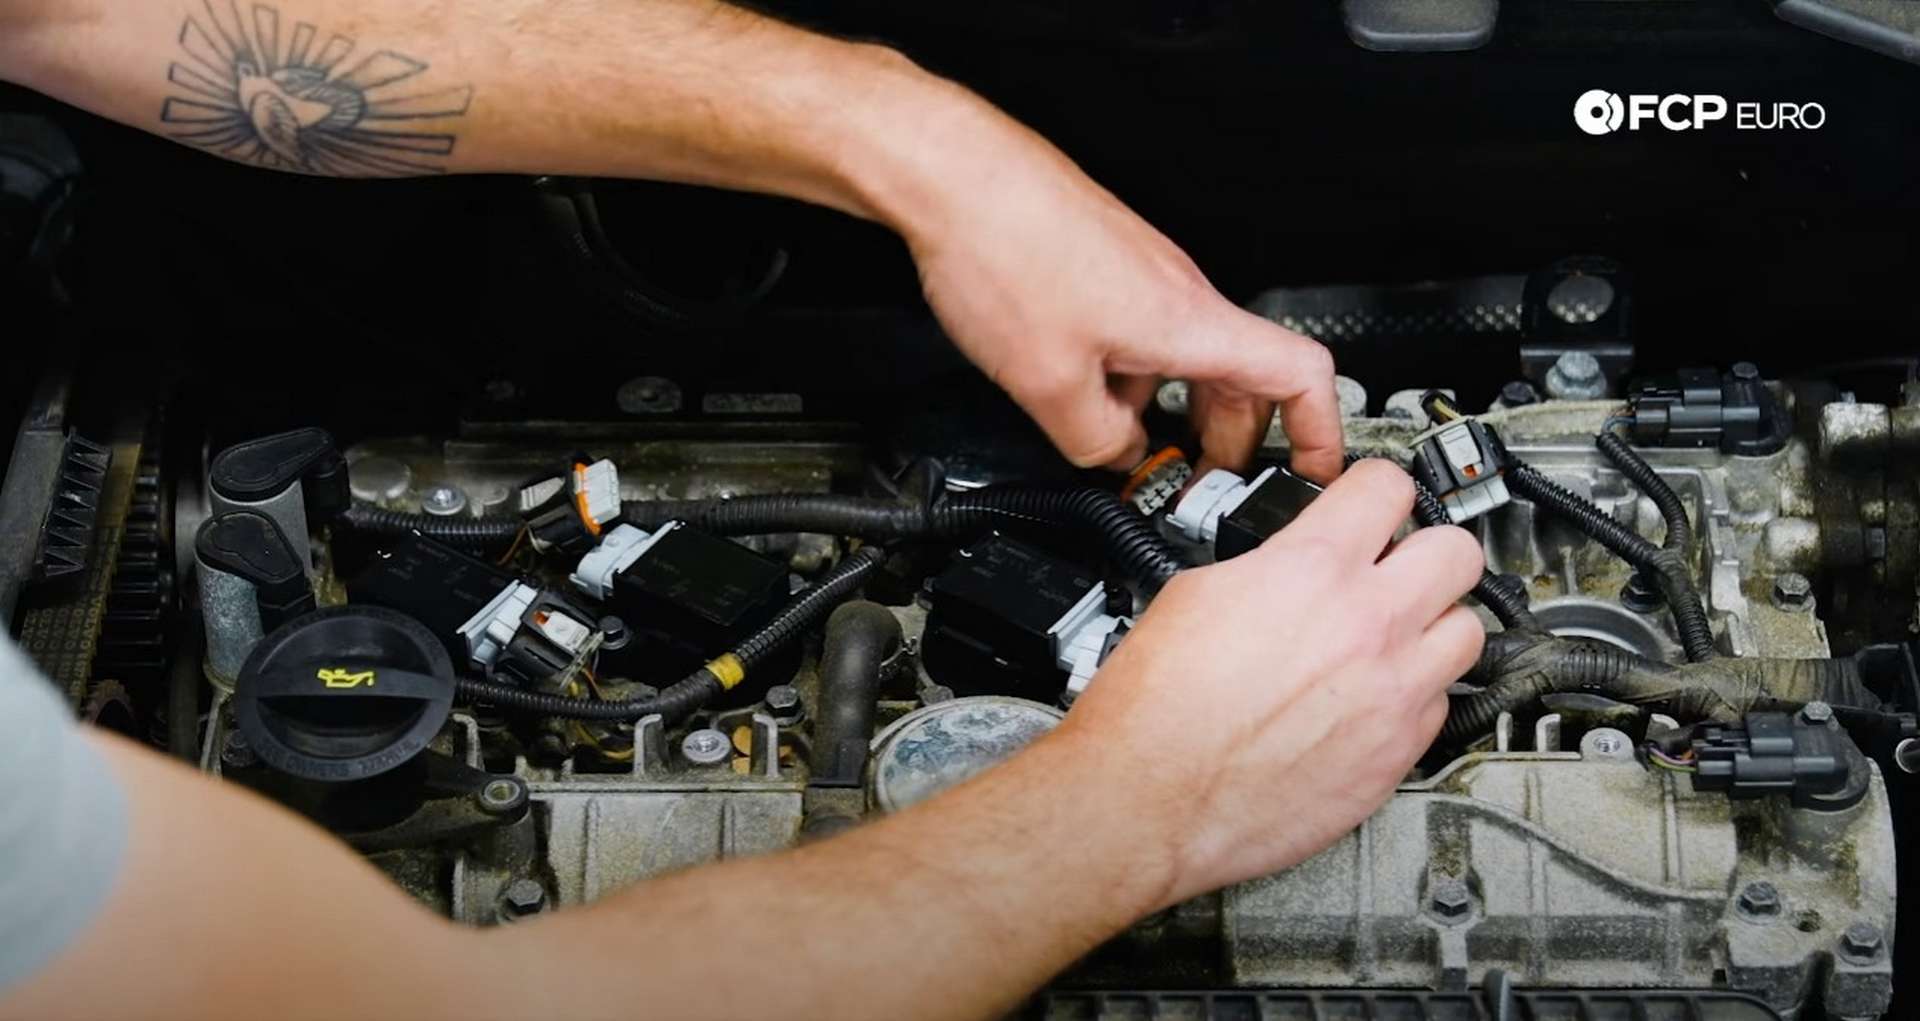 DIY Volvo Spark Plug and Ignition Coil Replacement installing the ignition coil]